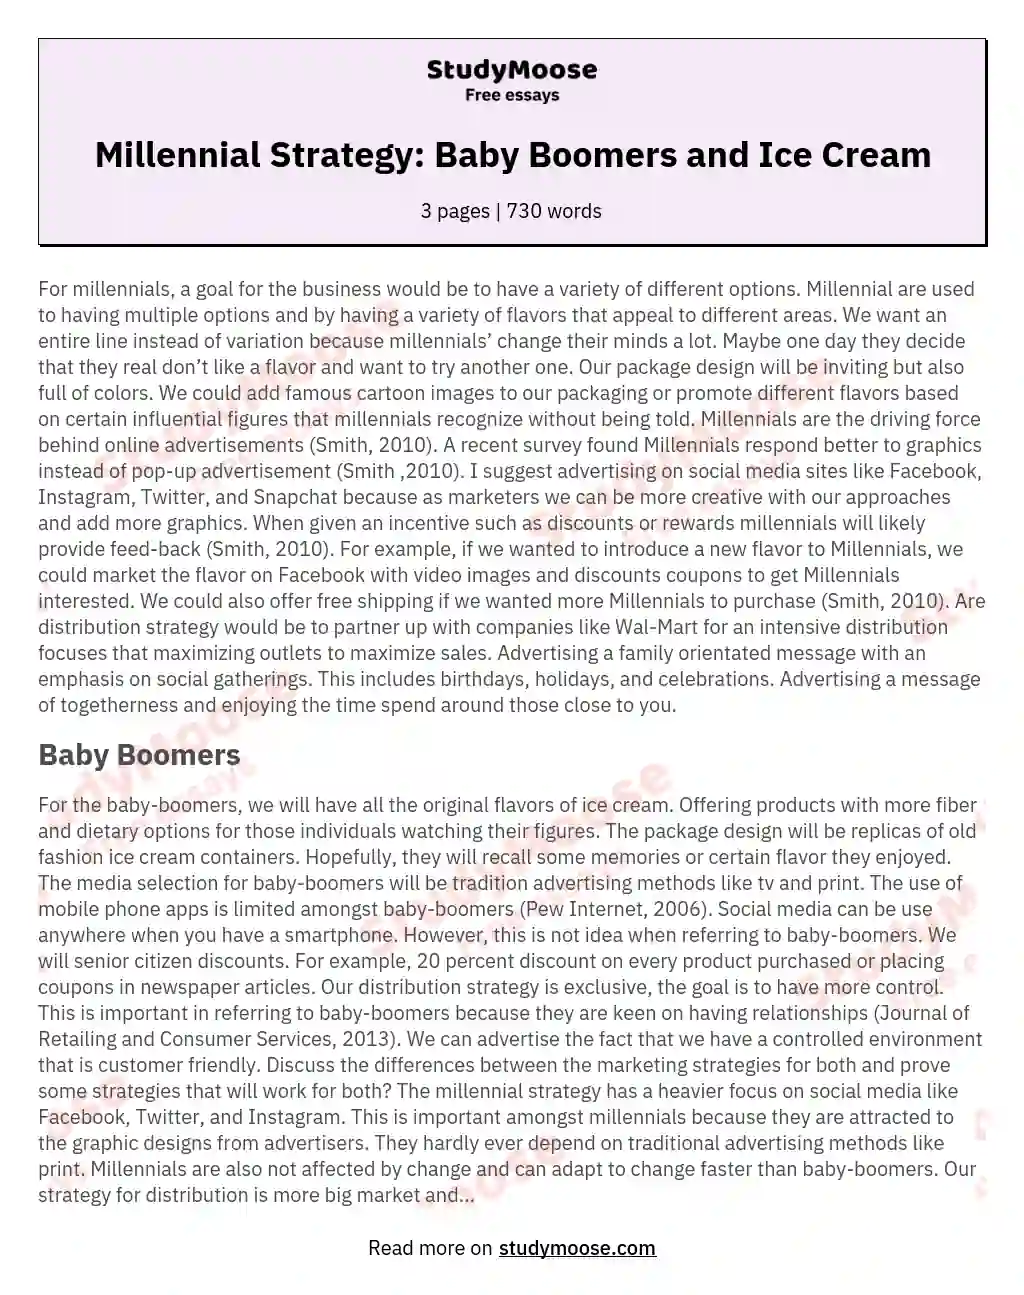 Millennial Strategy: Baby Boomers and Ice Cream